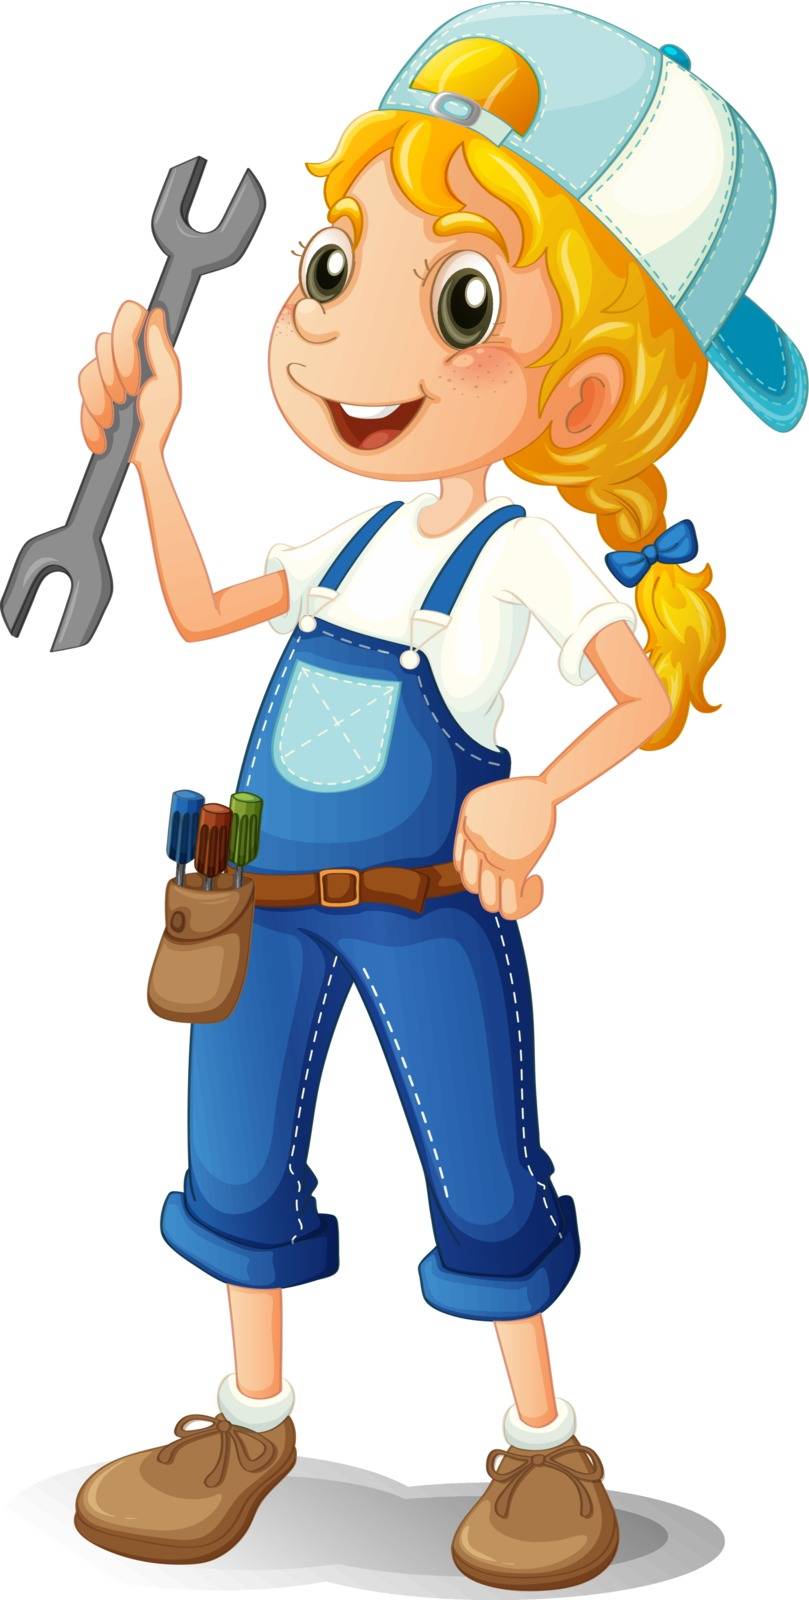 Illustration of a girl holding a tool on a white background